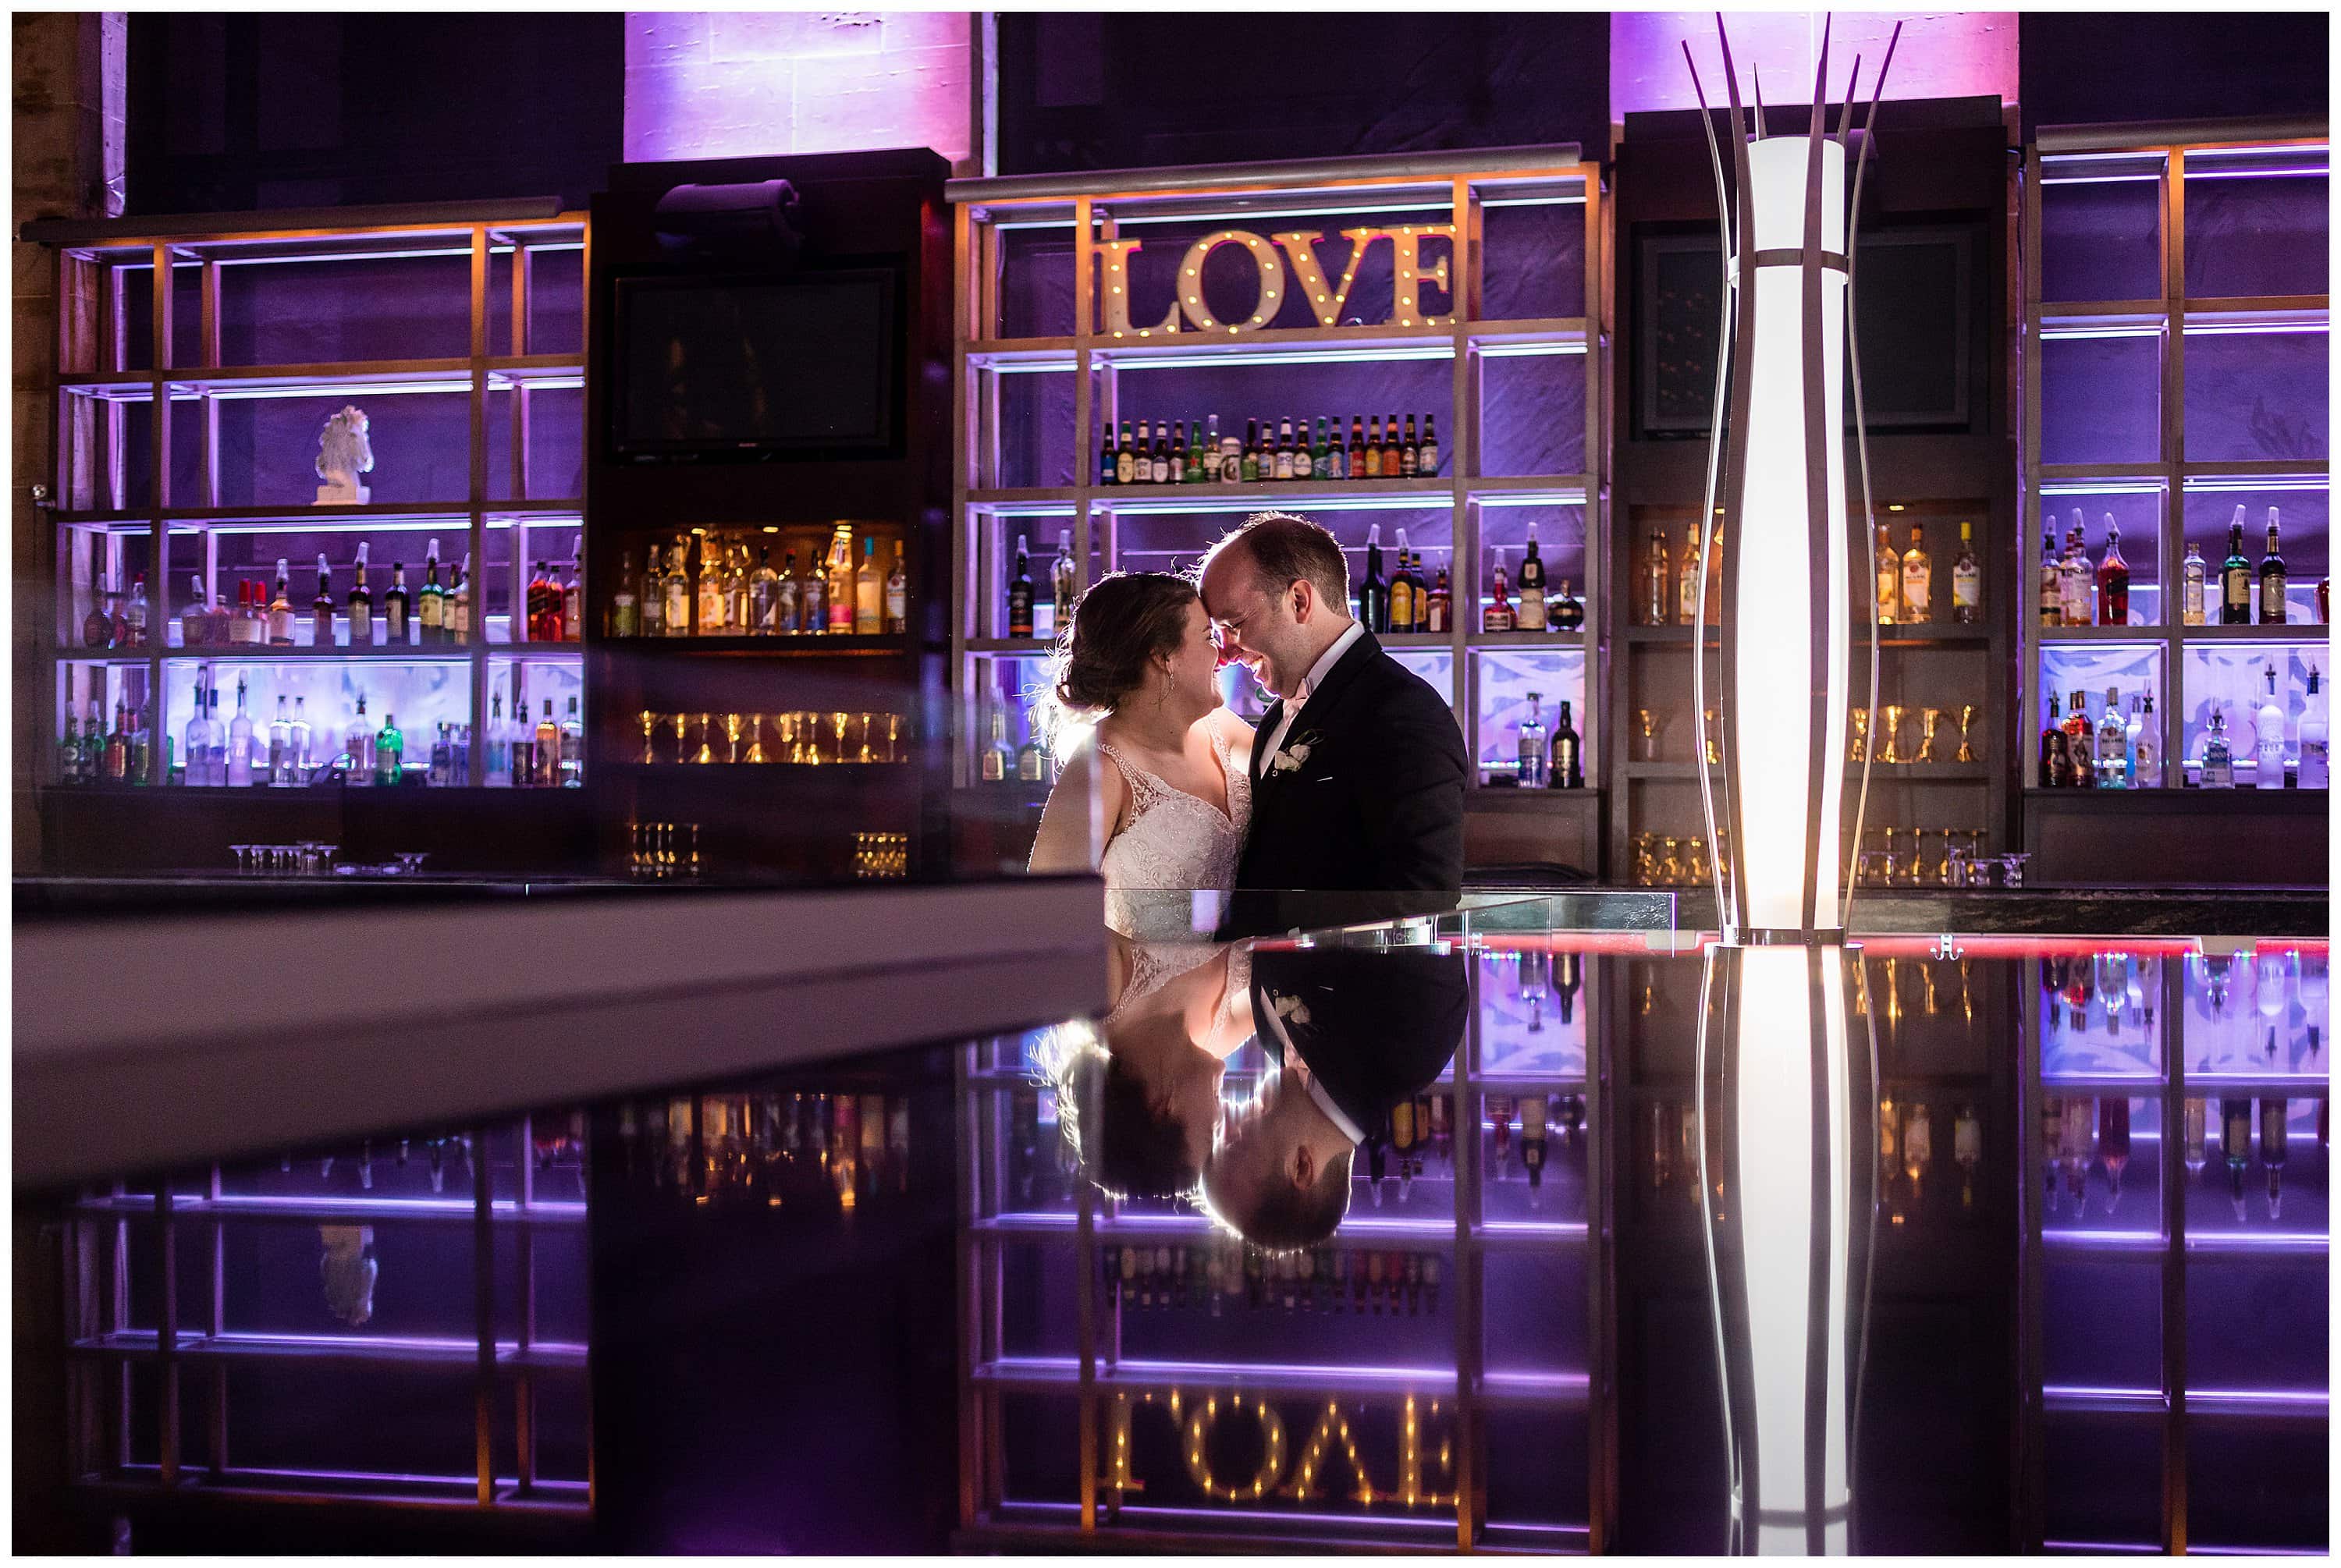 portrait of bride and groom behind the bar and reflecting off the bar at Union Trust in front of the Love sign - best Philadelphia wedding venues